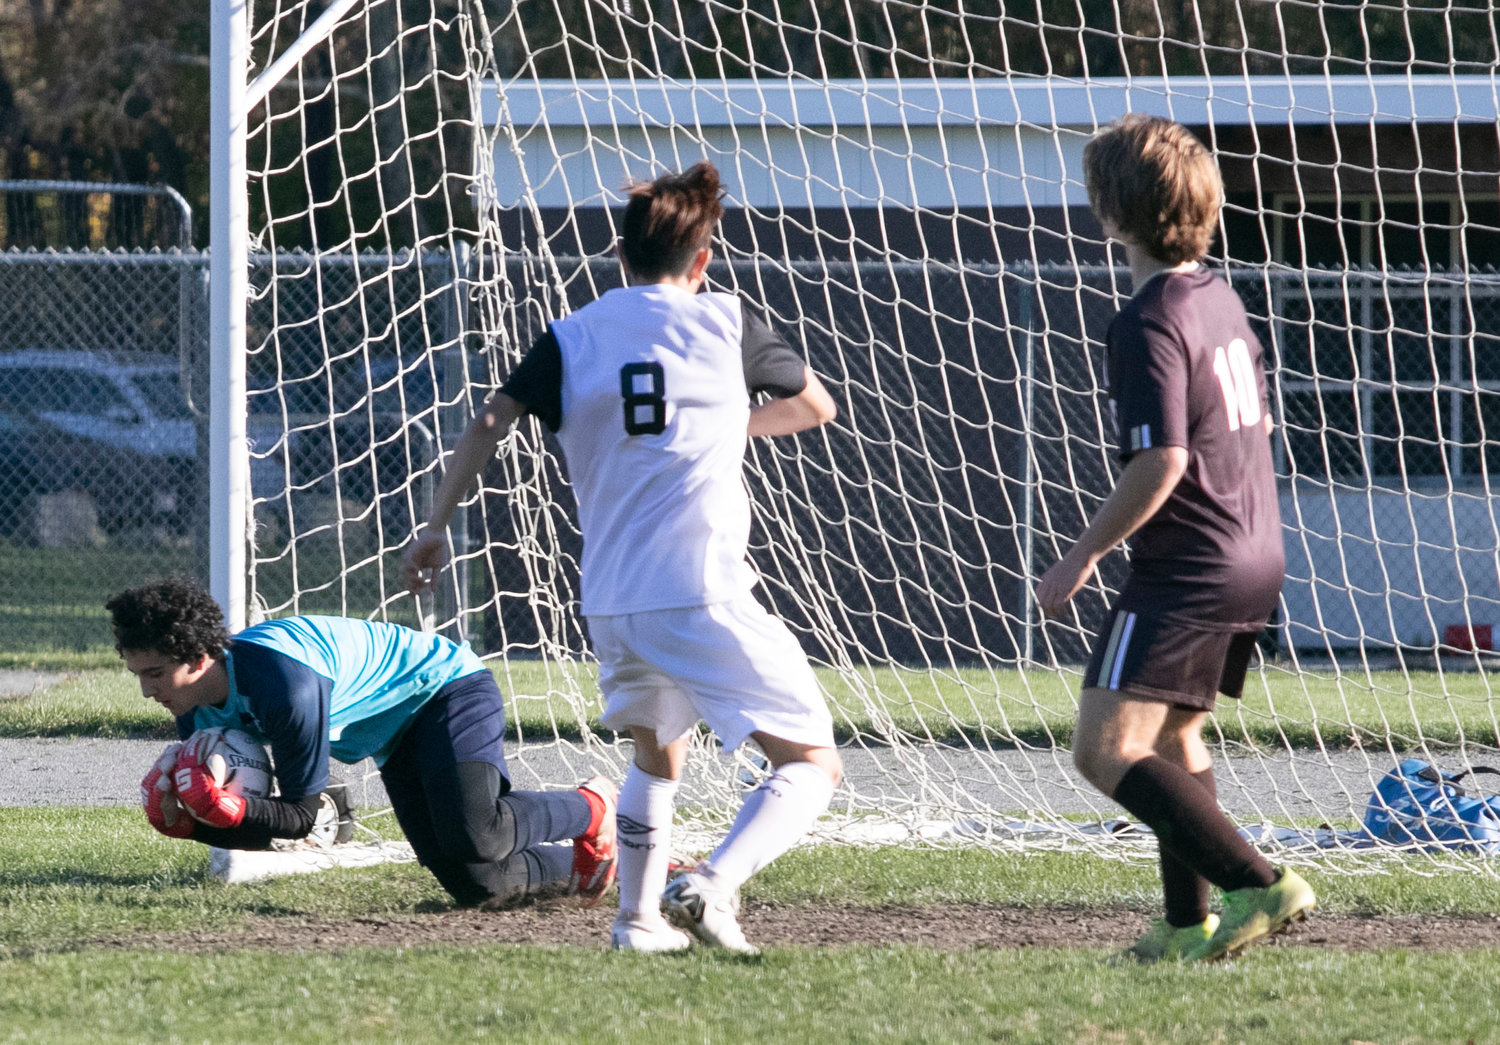 Goalkeeper Noah Amaral makes one of just four saves during the game as the Westport team defense stymied the Taconic attack.